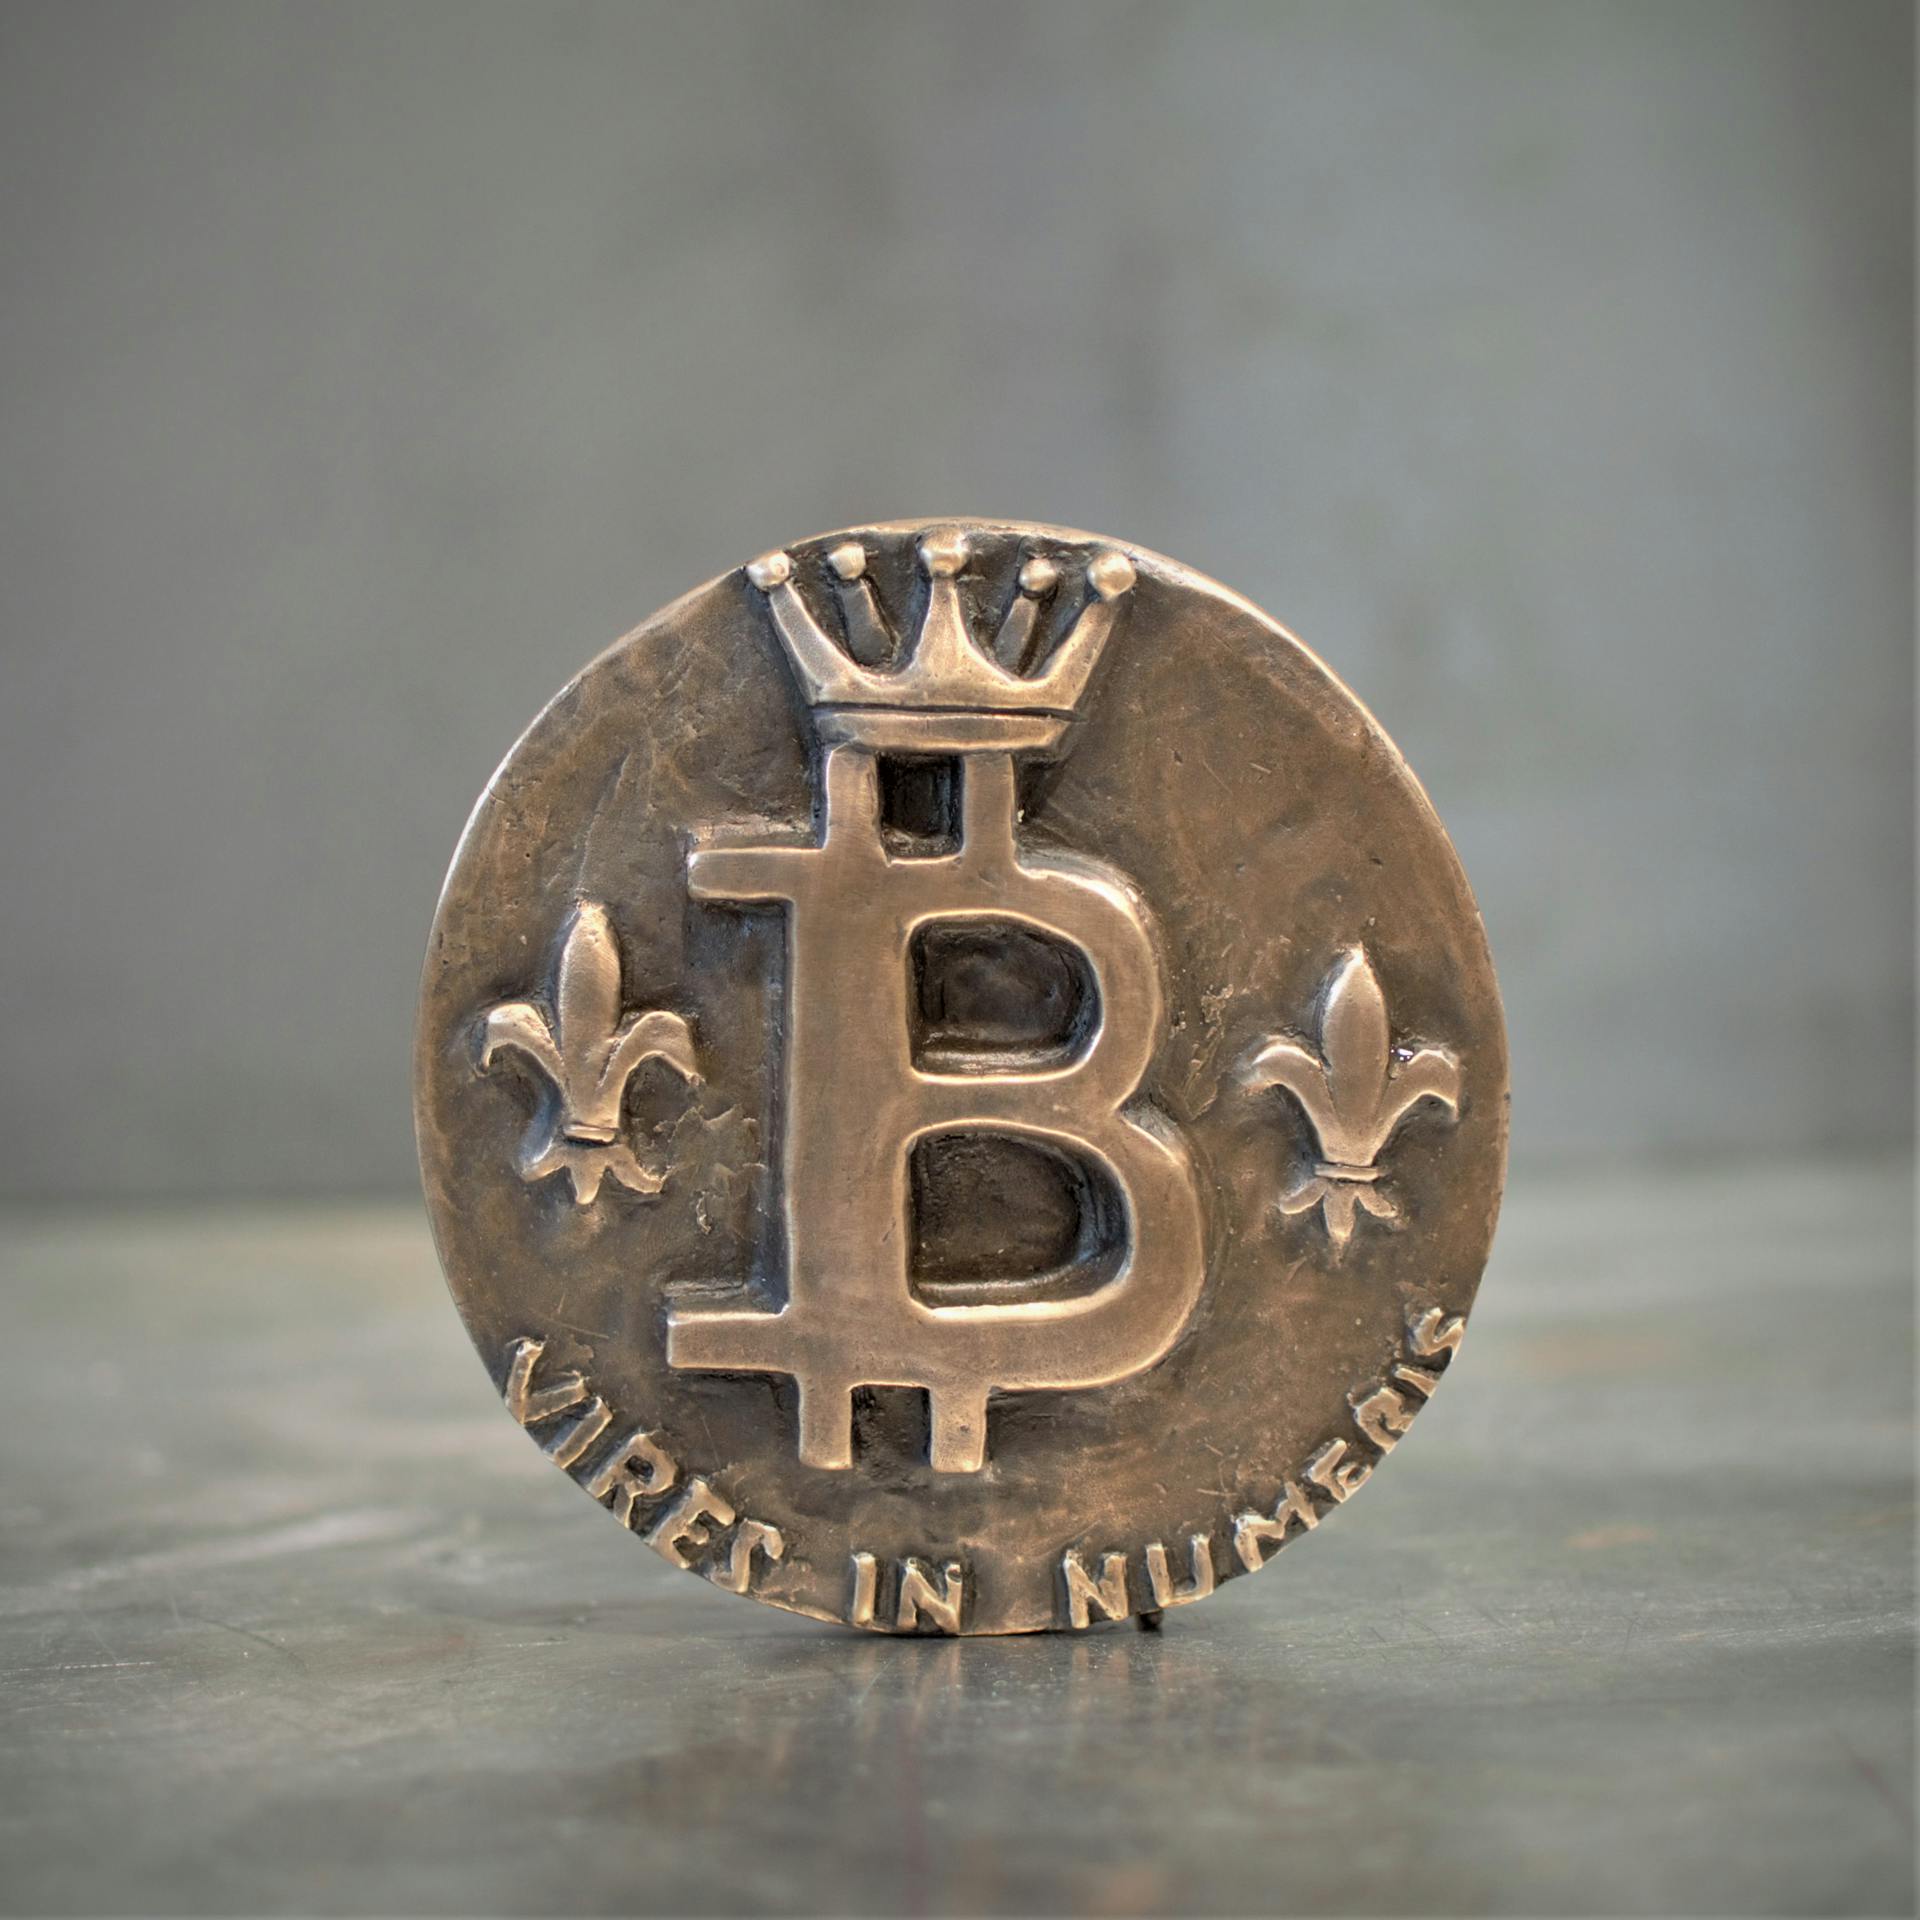 Picture of the Fortuna Bitcoin made by Isabelle Esnult